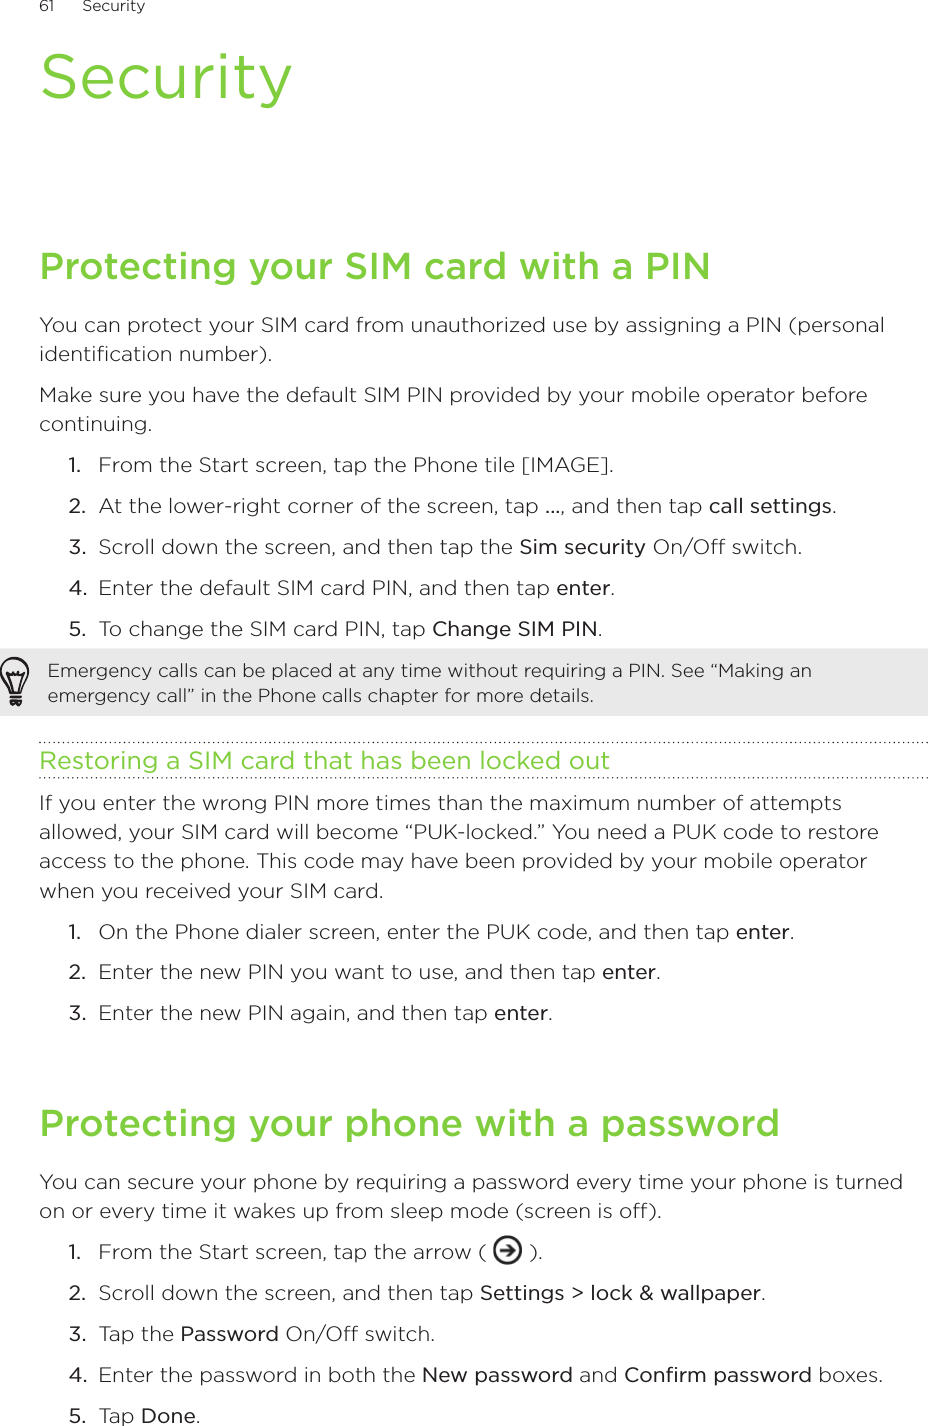 61      Security      SecurityProtecting your SIM card with a PINYou can protect your SIM card from unauthorized use by assigning a PIN (personal identification number). Make sure you have the default SIM PIN provided by your mobile operator before continuing.From the Start screen, tap the Phone tile [IMAGE].At the lower-right corner of the screen, tap ..., and then tap call settings.Scroll down the screen, and then tap the Sim security On/Off switch.Enter the default SIM card PIN, and then tap enter.To change the SIM card PIN, tap Change SIM PIN.Emergency calls can be placed at any time without requiring a PIN. See “Making an emergency call” in the Phone calls chapter for more details. Restoring a SIM card that has been locked outIf you enter the wrong PIN more times than the maximum number of attempts allowed, your SIM card will become “PUK-locked.” You need a PUK code to restore access to the phone. This code may have been provided by your mobile operator when you received your SIM card.On the Phone dialer screen, enter the PUK code, and then tap enter.Enter the new PIN you want to use, and then tap enter. Enter the new PIN again, and then tap enter.Protecting your phone with a passwordYou can secure your phone by requiring a password every time your phone is turned on or every time it wakes up from sleep mode (screen is off).From the Start screen, tap the arrow (   ).Scroll down the screen, and then tap Settings &gt; lock &amp; wallpaper.Tap the Password On/Off switch.Enter the password in both the New password and Confirm password boxes.Tap Done.1.2.3.4.5.1.2.3.1.2.3.4.5.